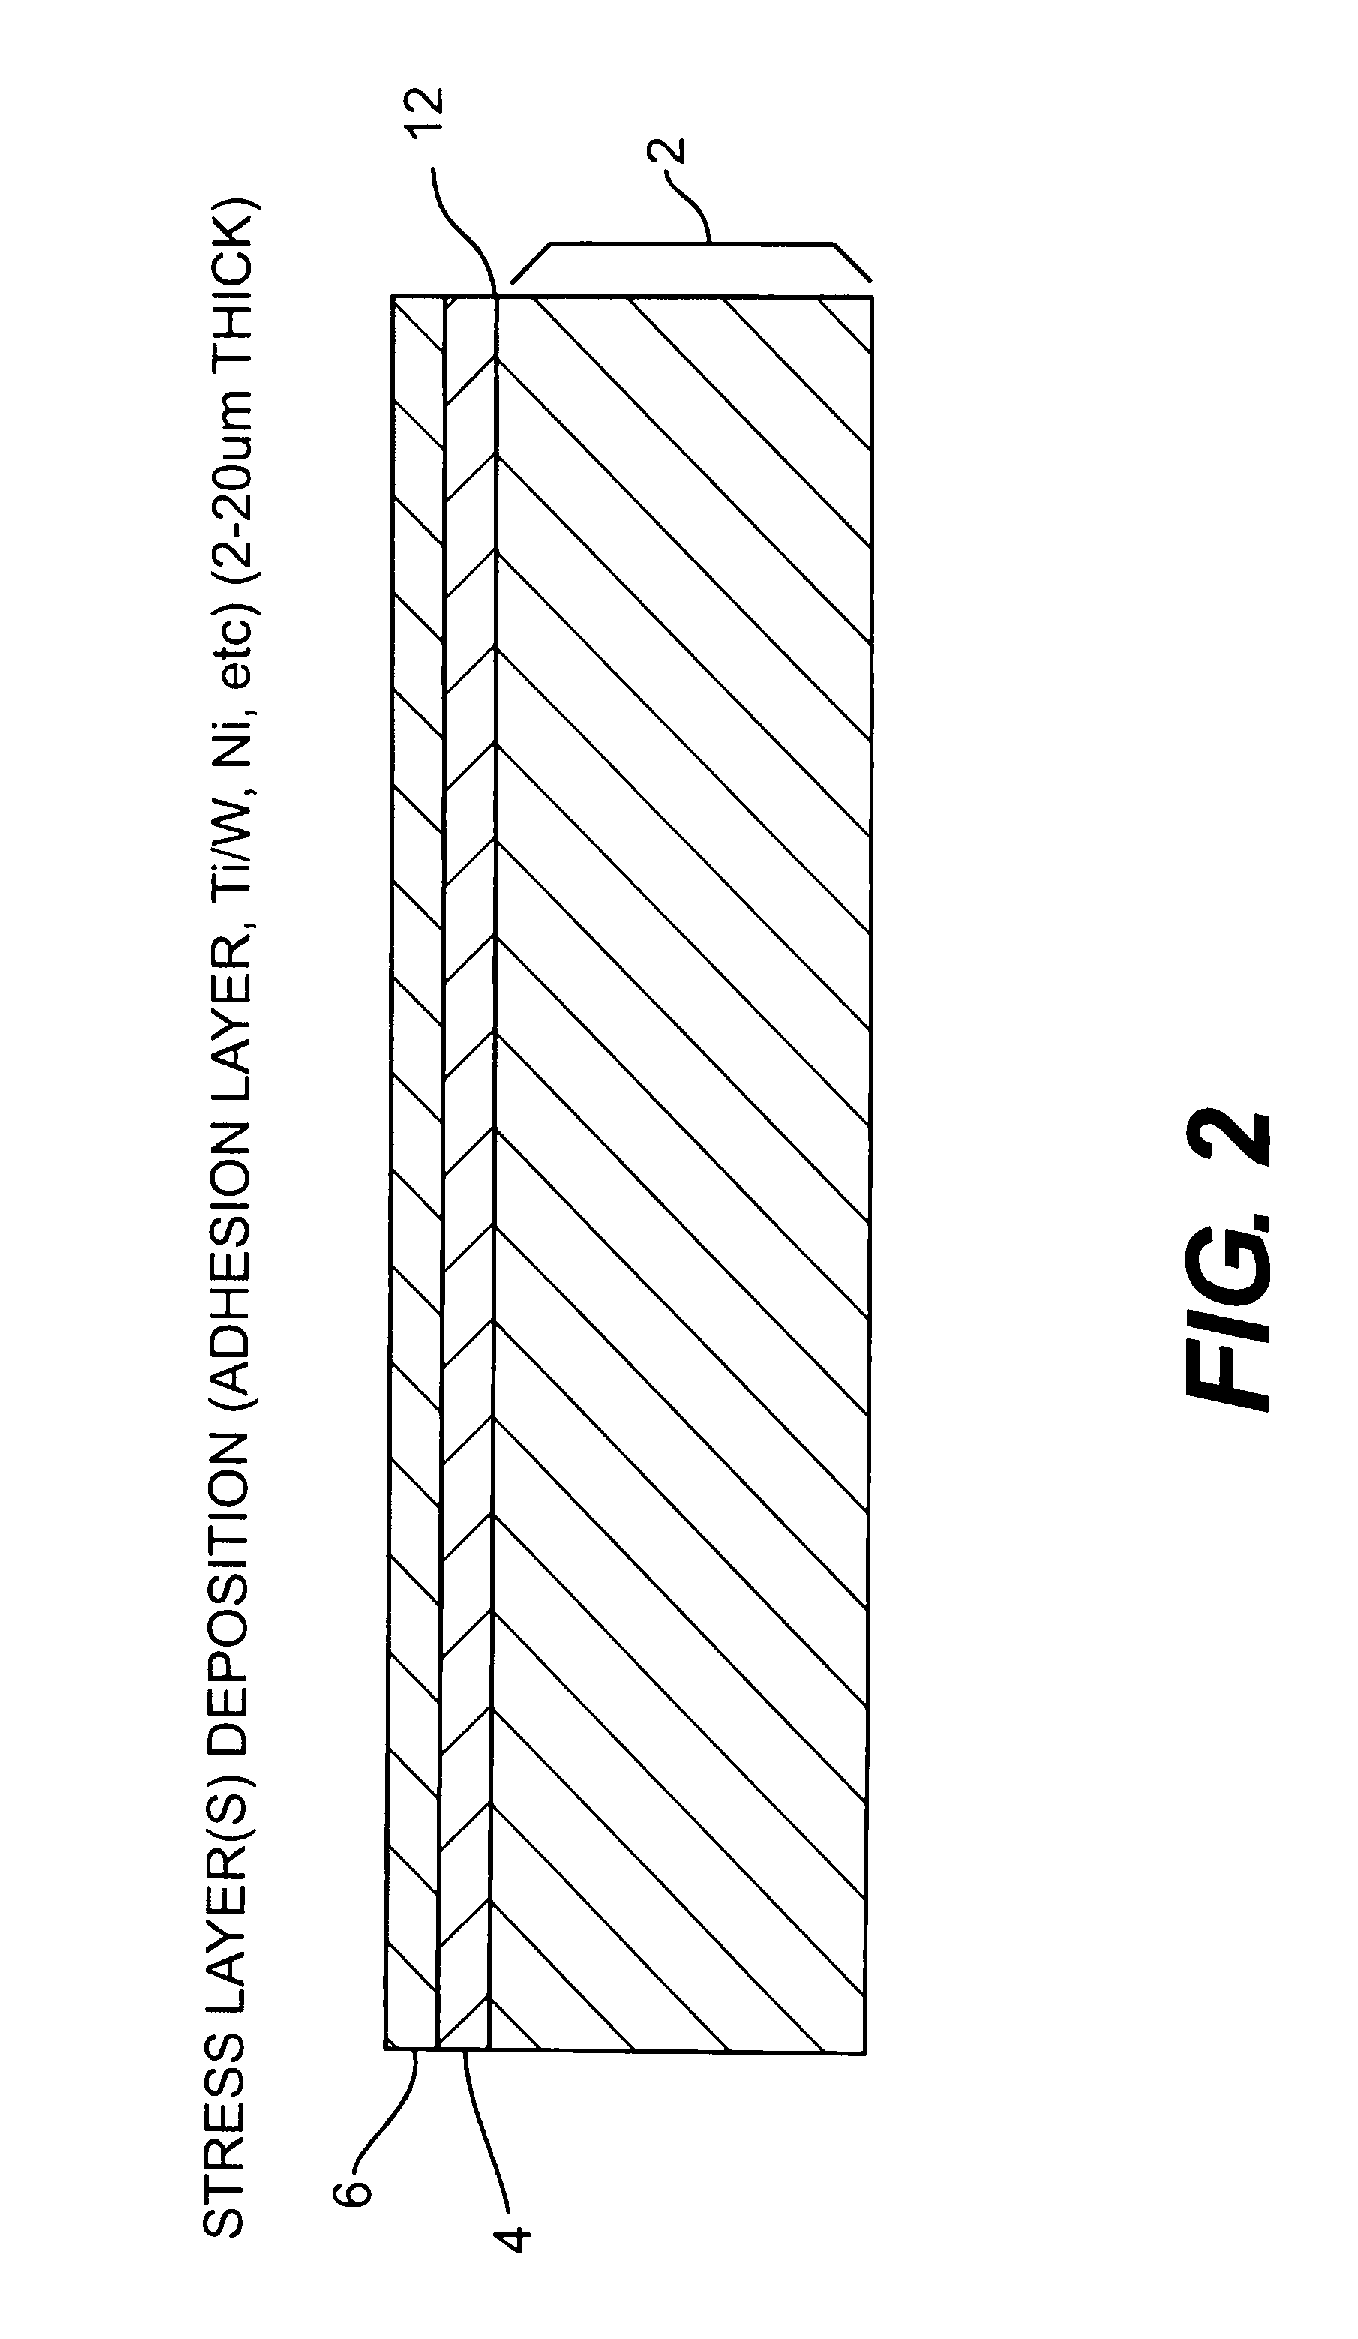 Thin substrate fabrication using stress-induced substrate spalling